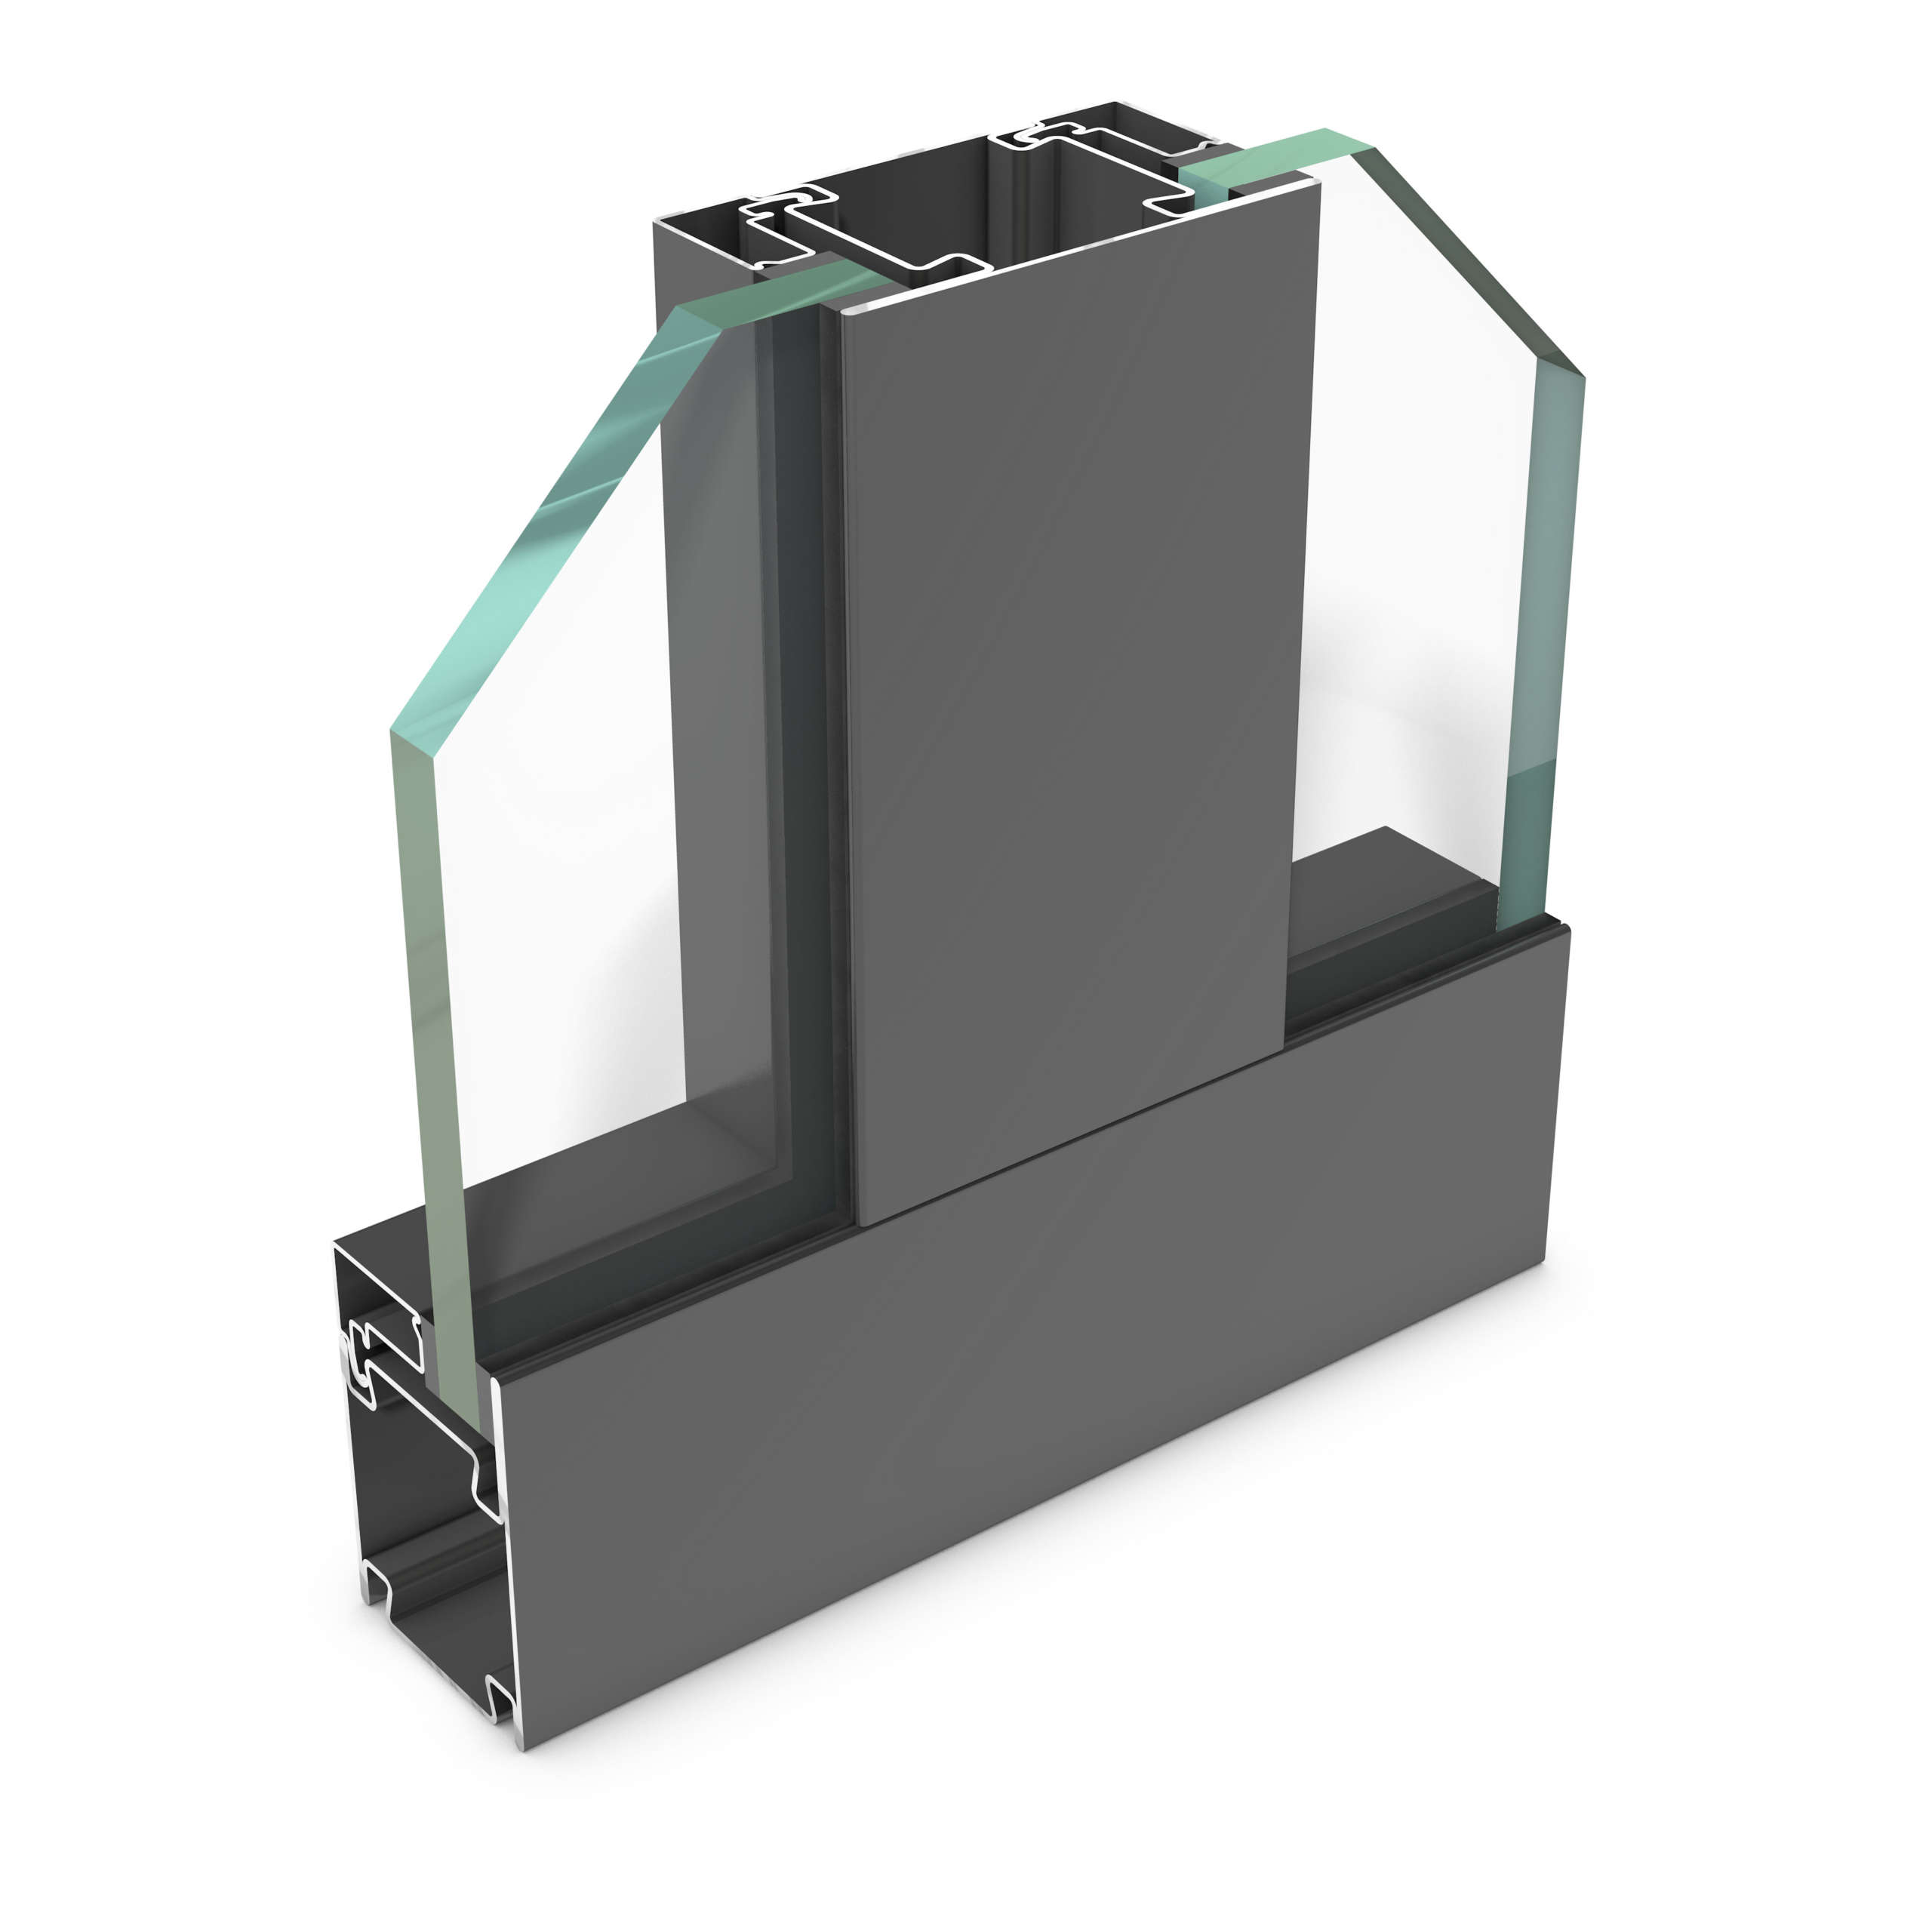 rp hermetic 55FP-120 – steel profile system for fire protection partition walls to E120/EW120